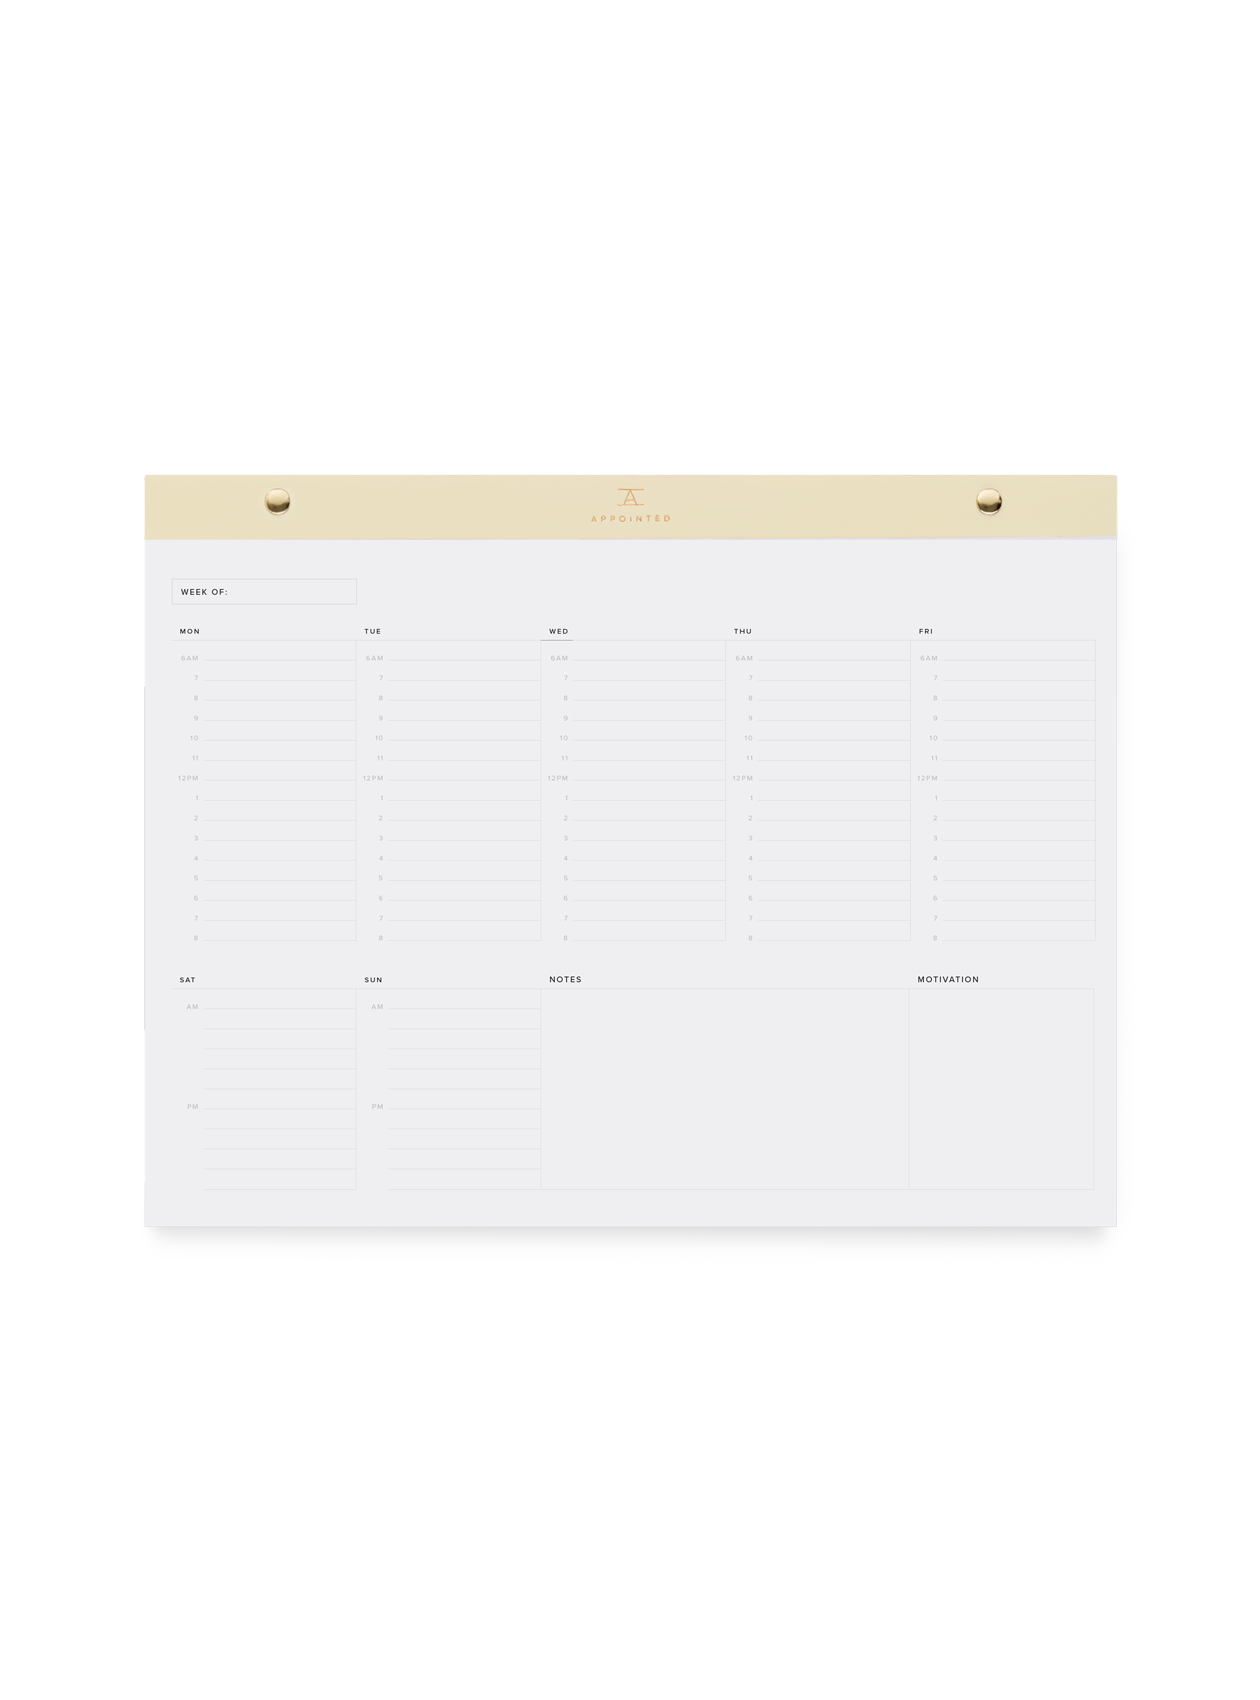 Appointed Daily Desktop Planner in Ecru, bound in leather-like material front view || Ecru